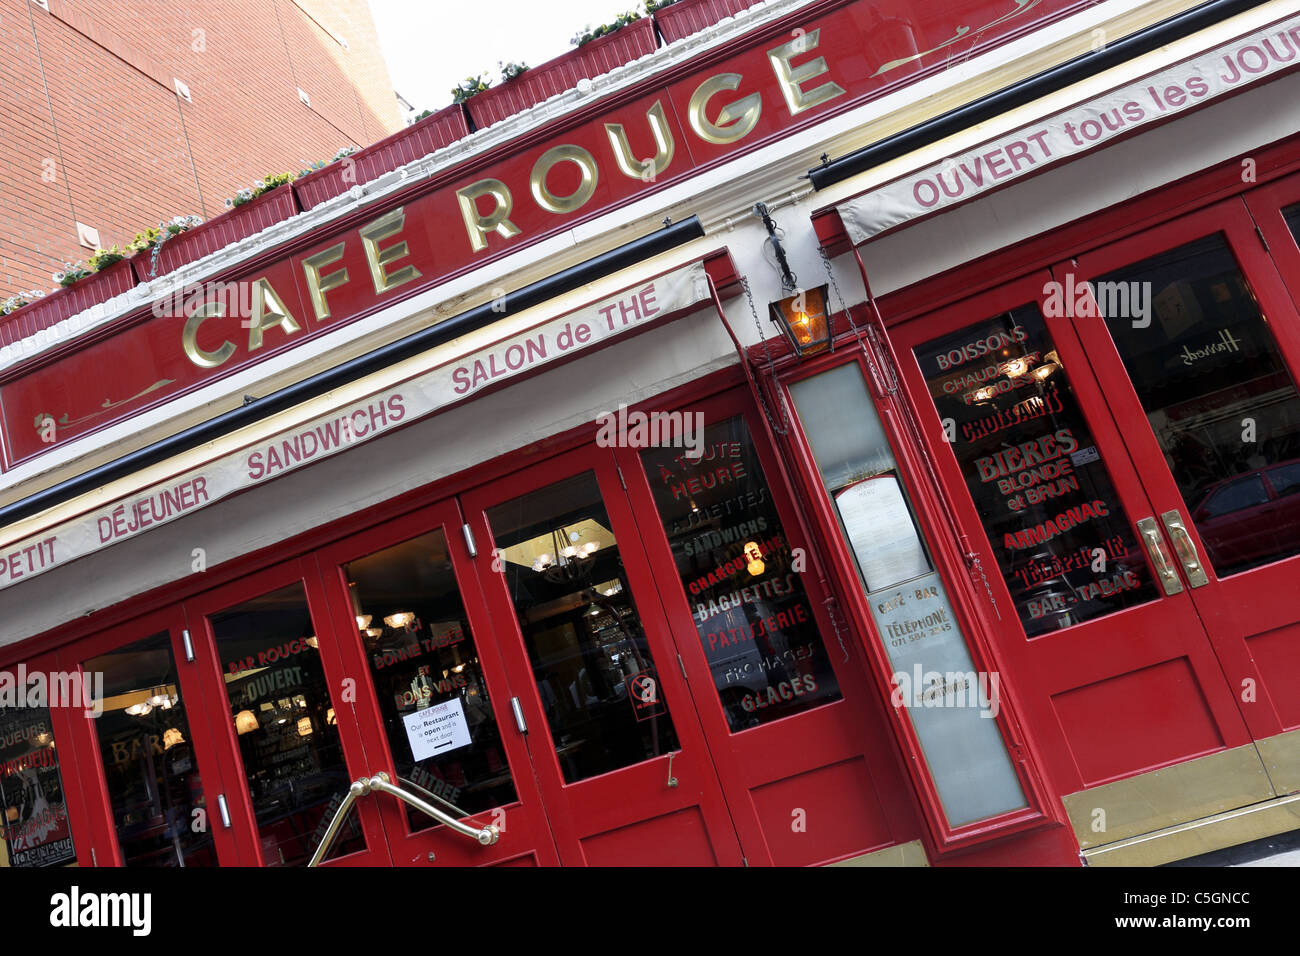 CAFE ROUGE, popular chain of French restaurants and cafes scattered around London, here the Basil street outlet is viewed. Stock Photo